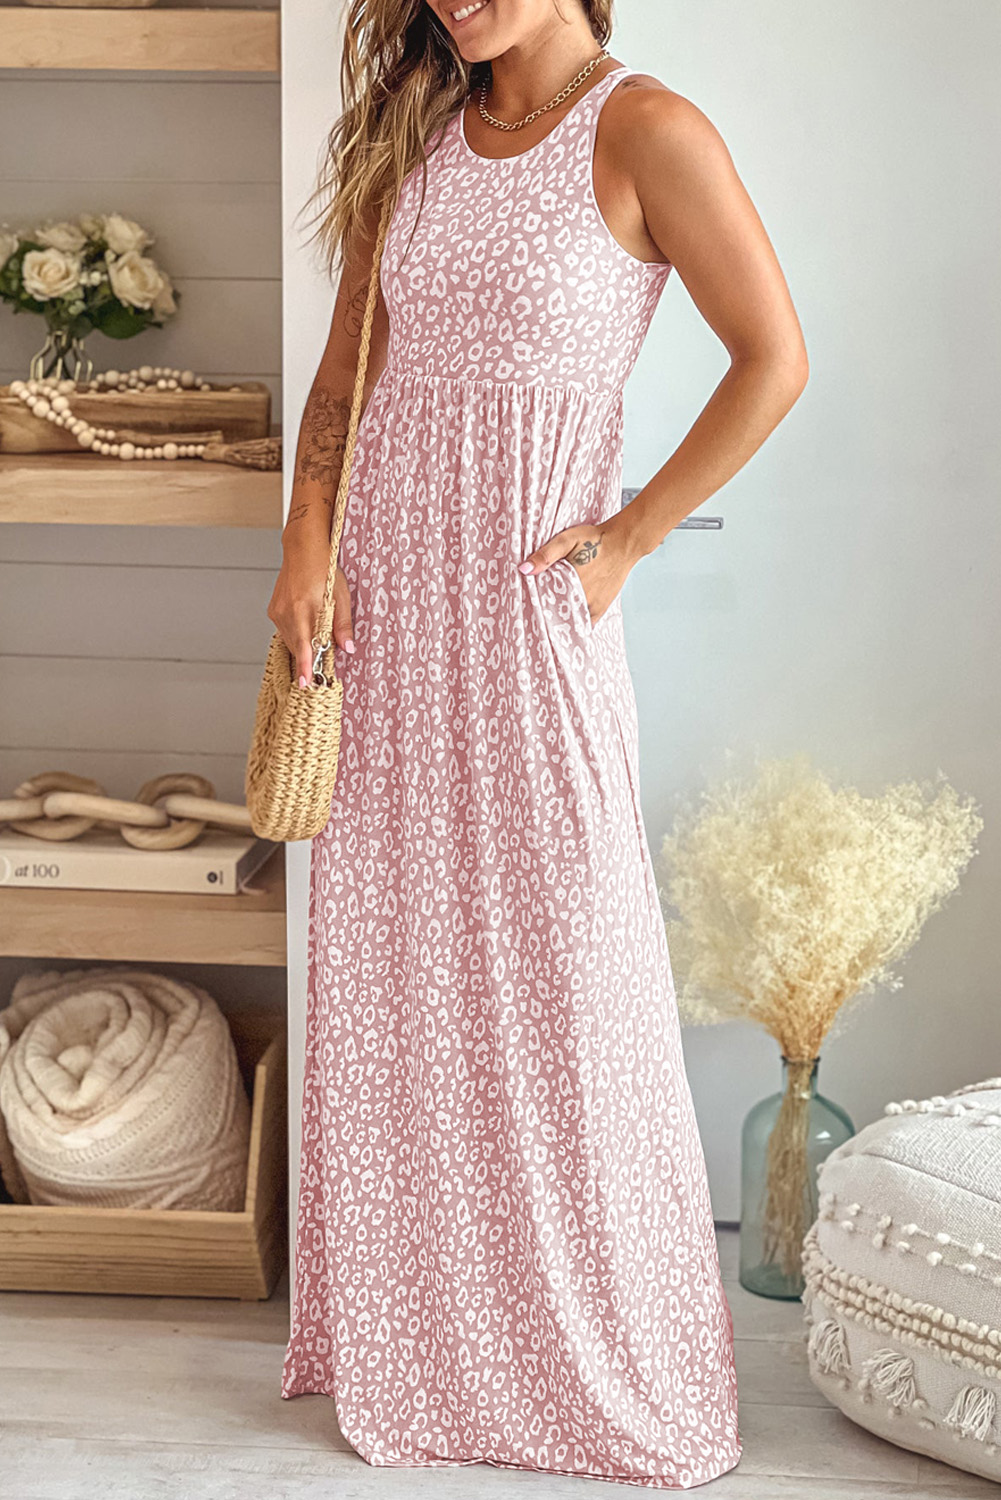 Shewin Wholesale Clothes Vendors Pink Sleeveless Floor Length Leopard Print DRESS with Pockets